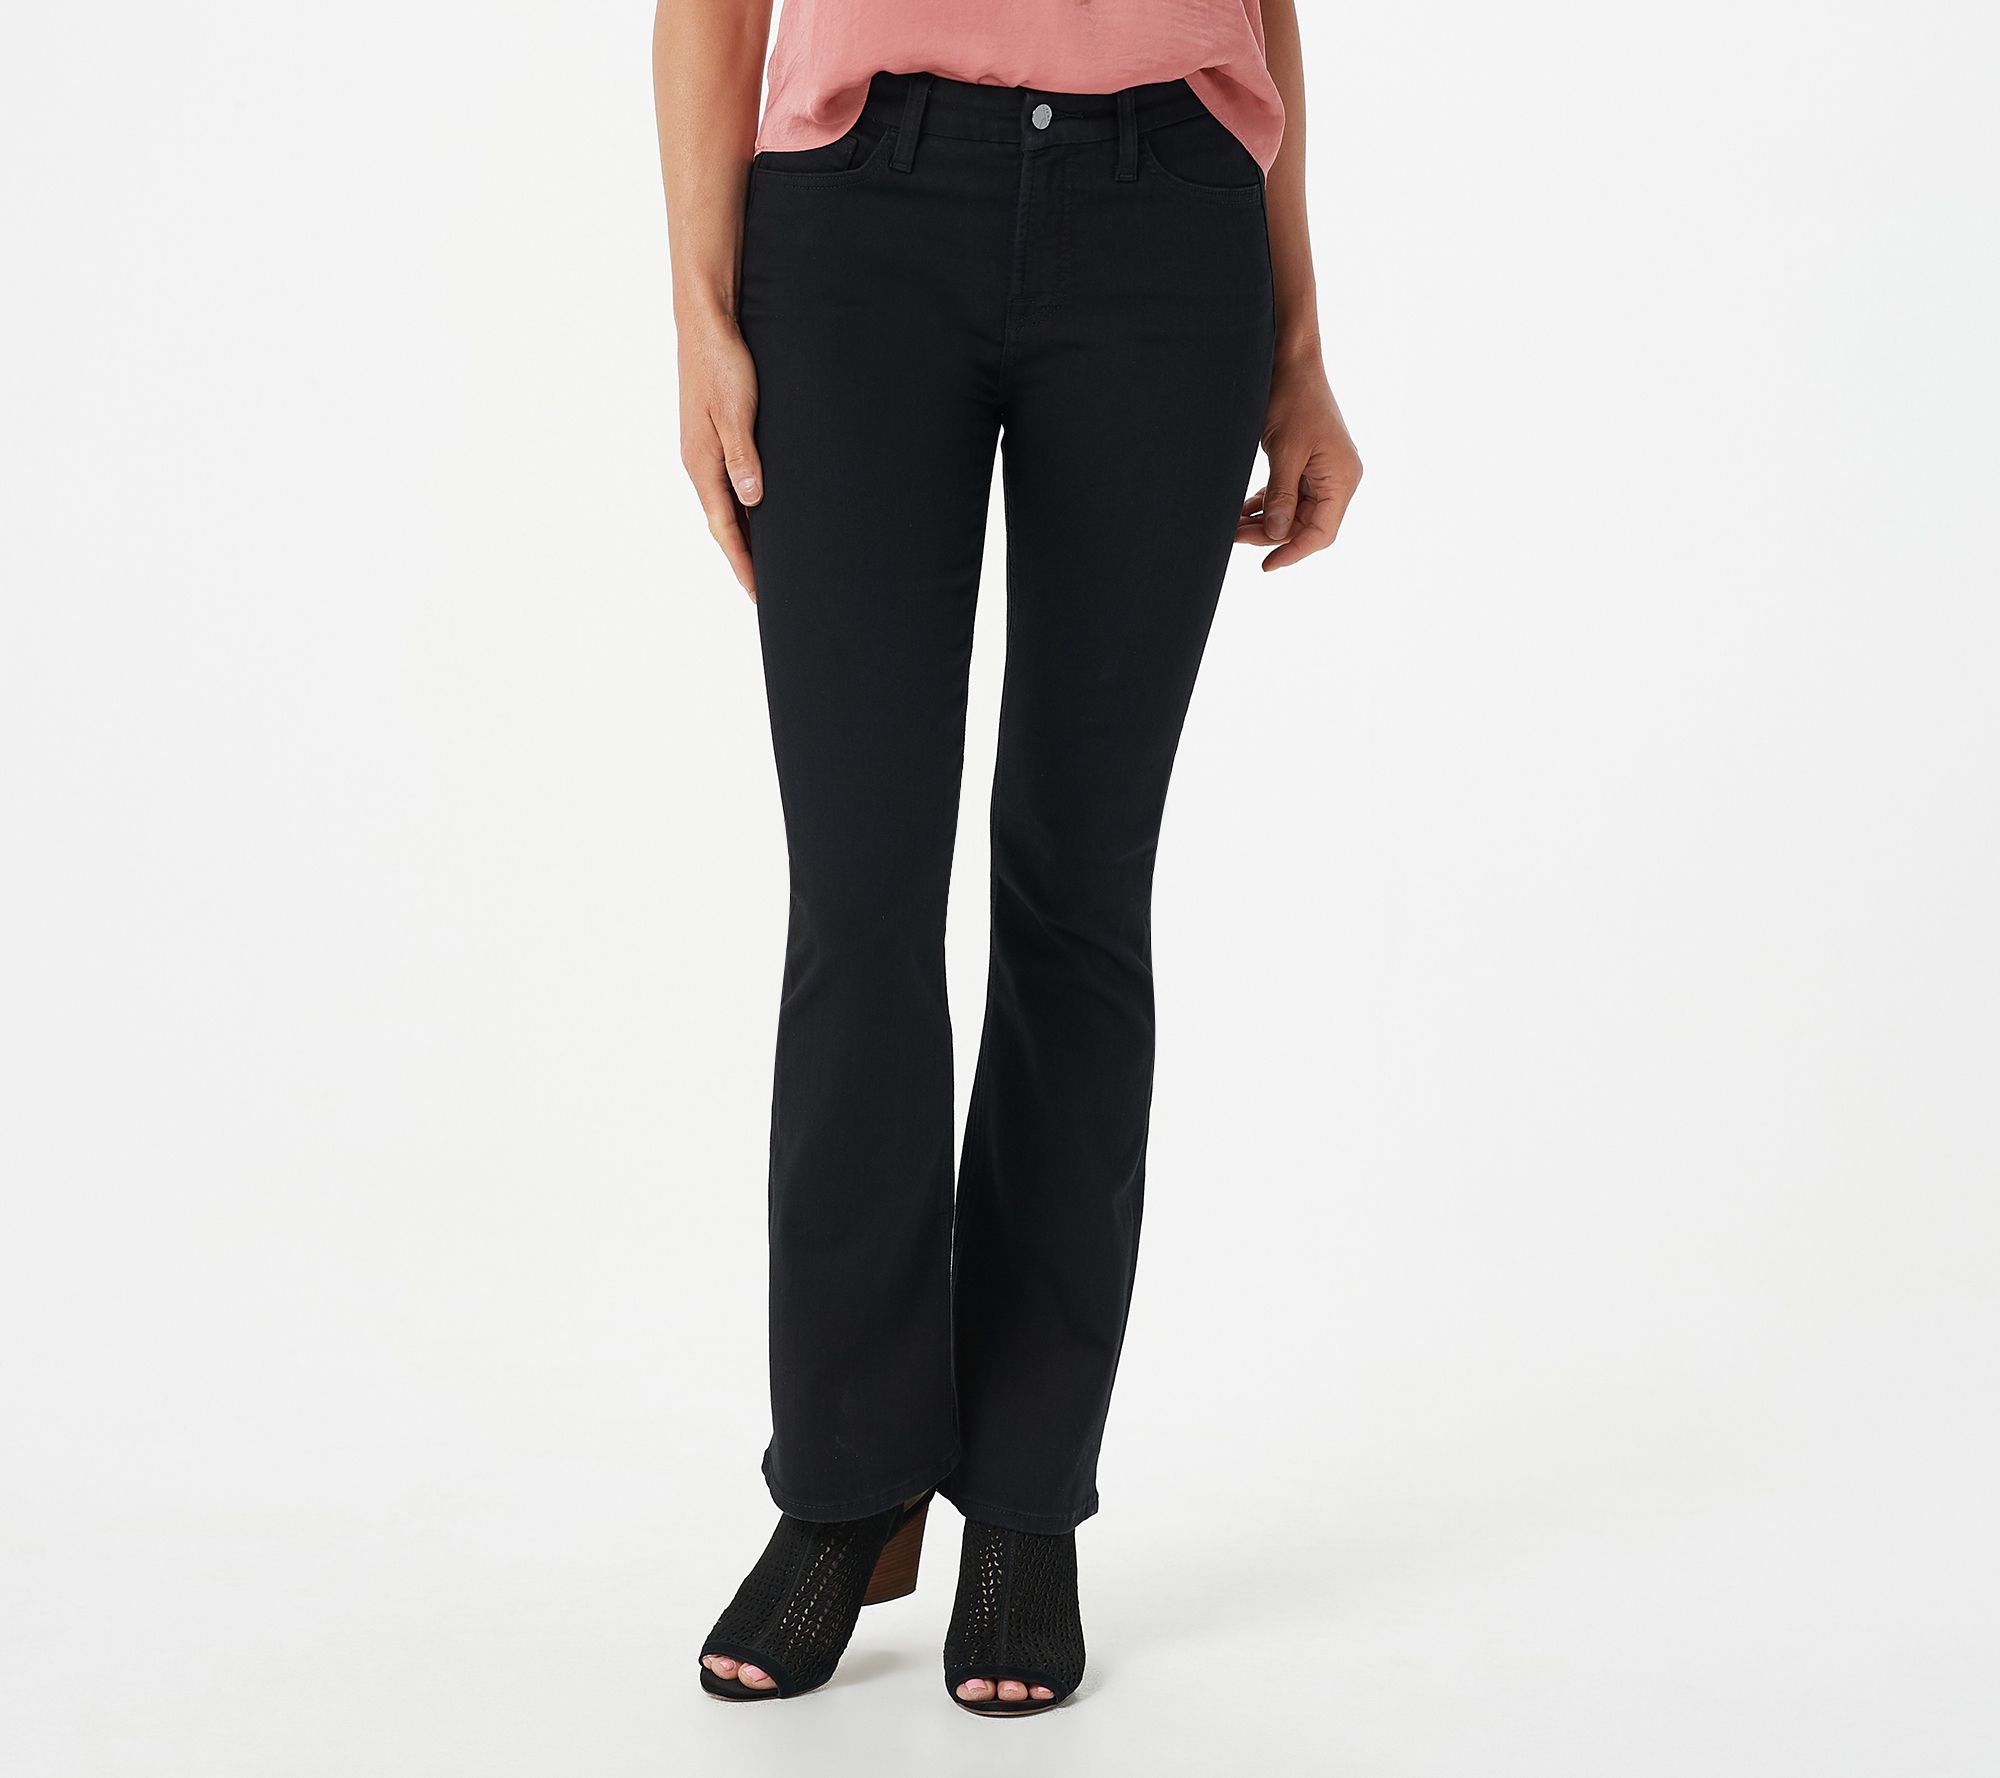 7 for all mankind petite